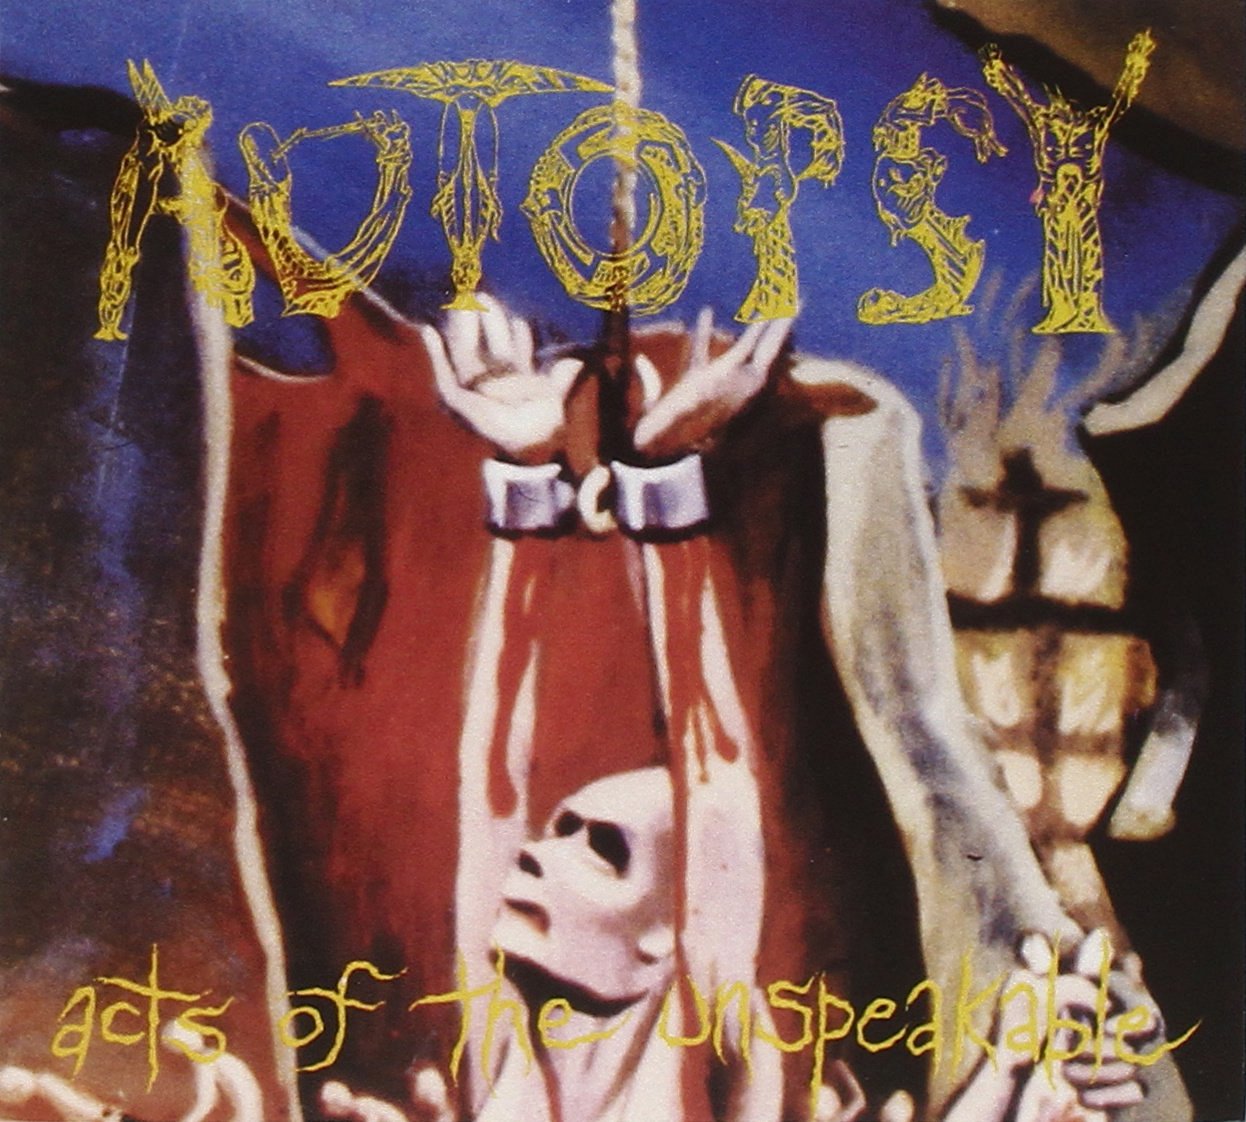 Autopsy "Acts Of The Unspeakable" CD